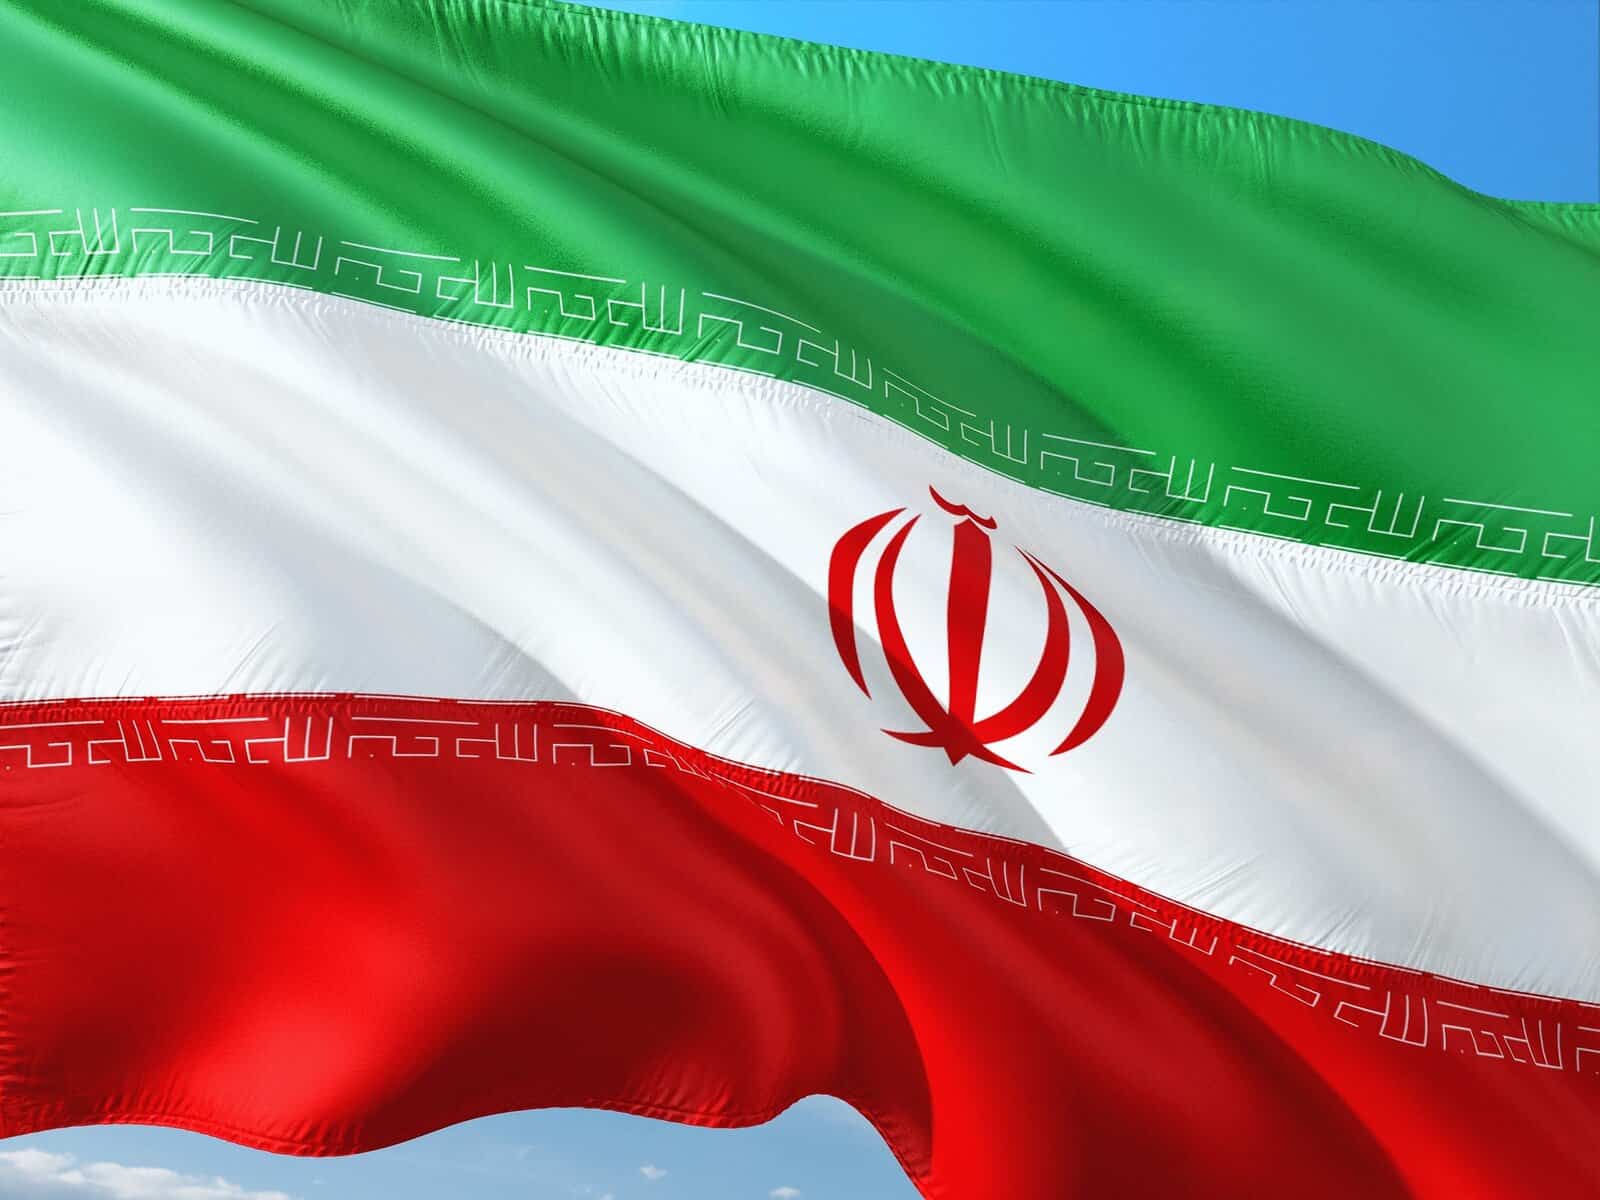 The flag of Iran is shown close up and blowing in the wind.